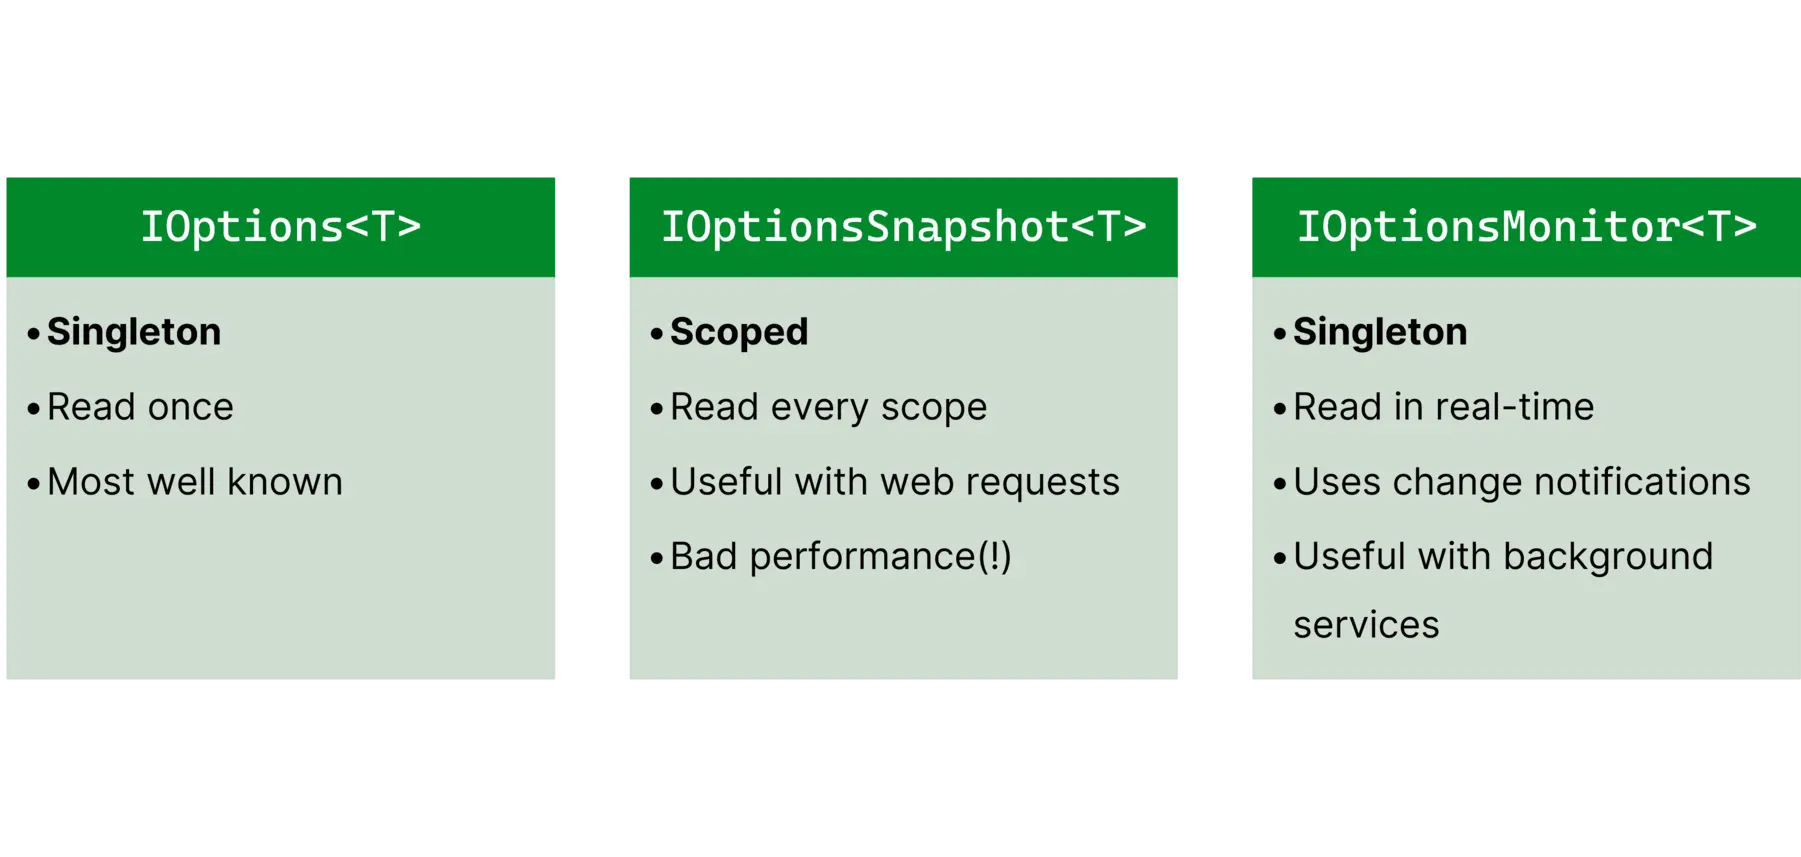 Overview of the capabilities of IOptions, IOptionsSnapshot and IOptionsMonitor